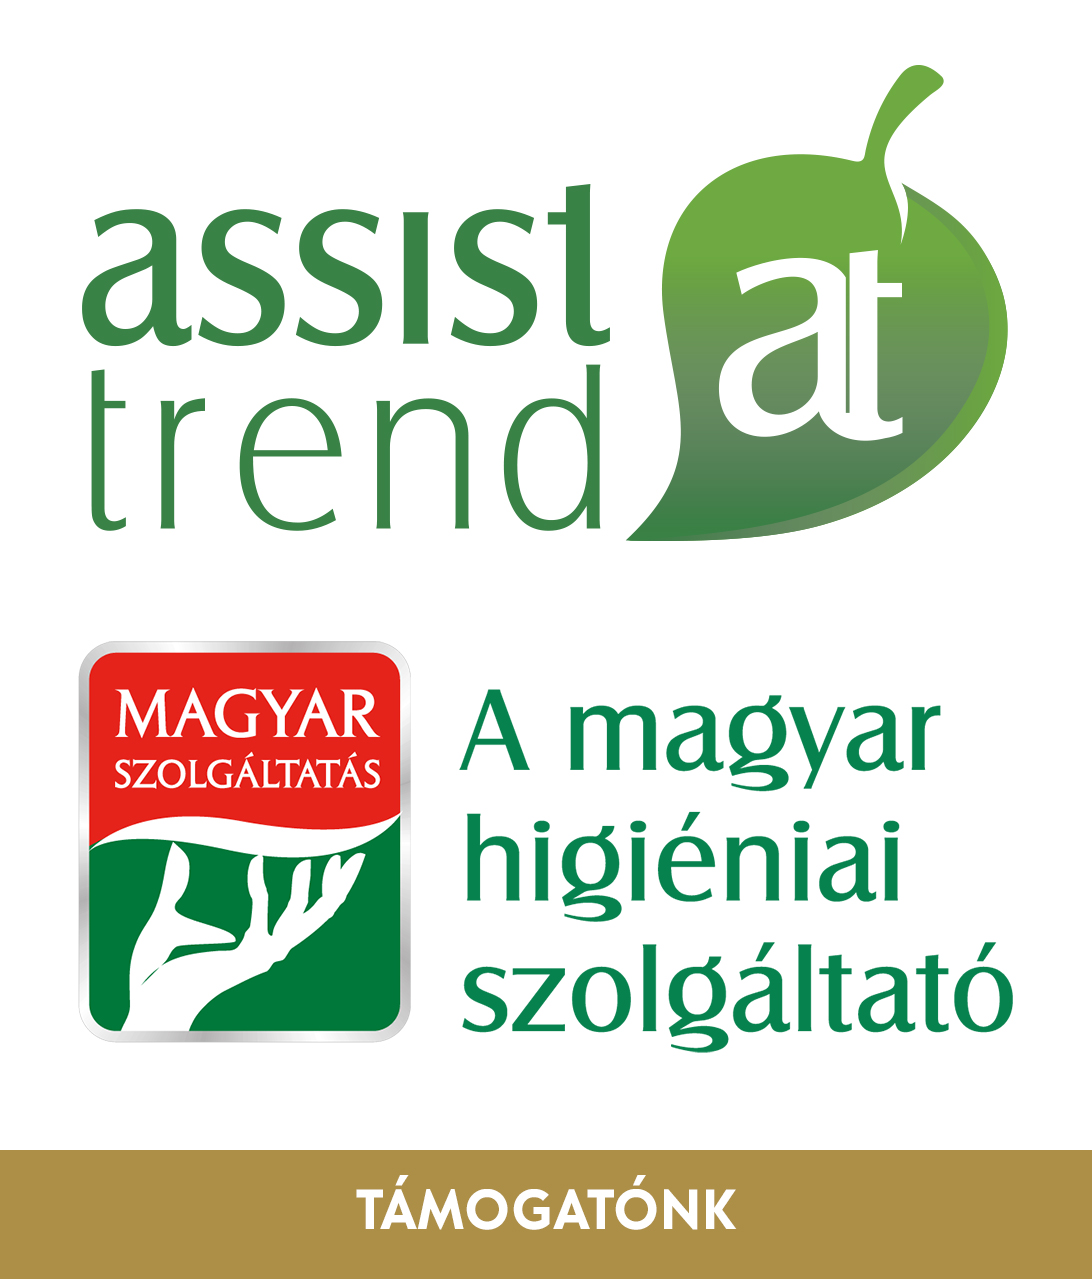 Assist trend